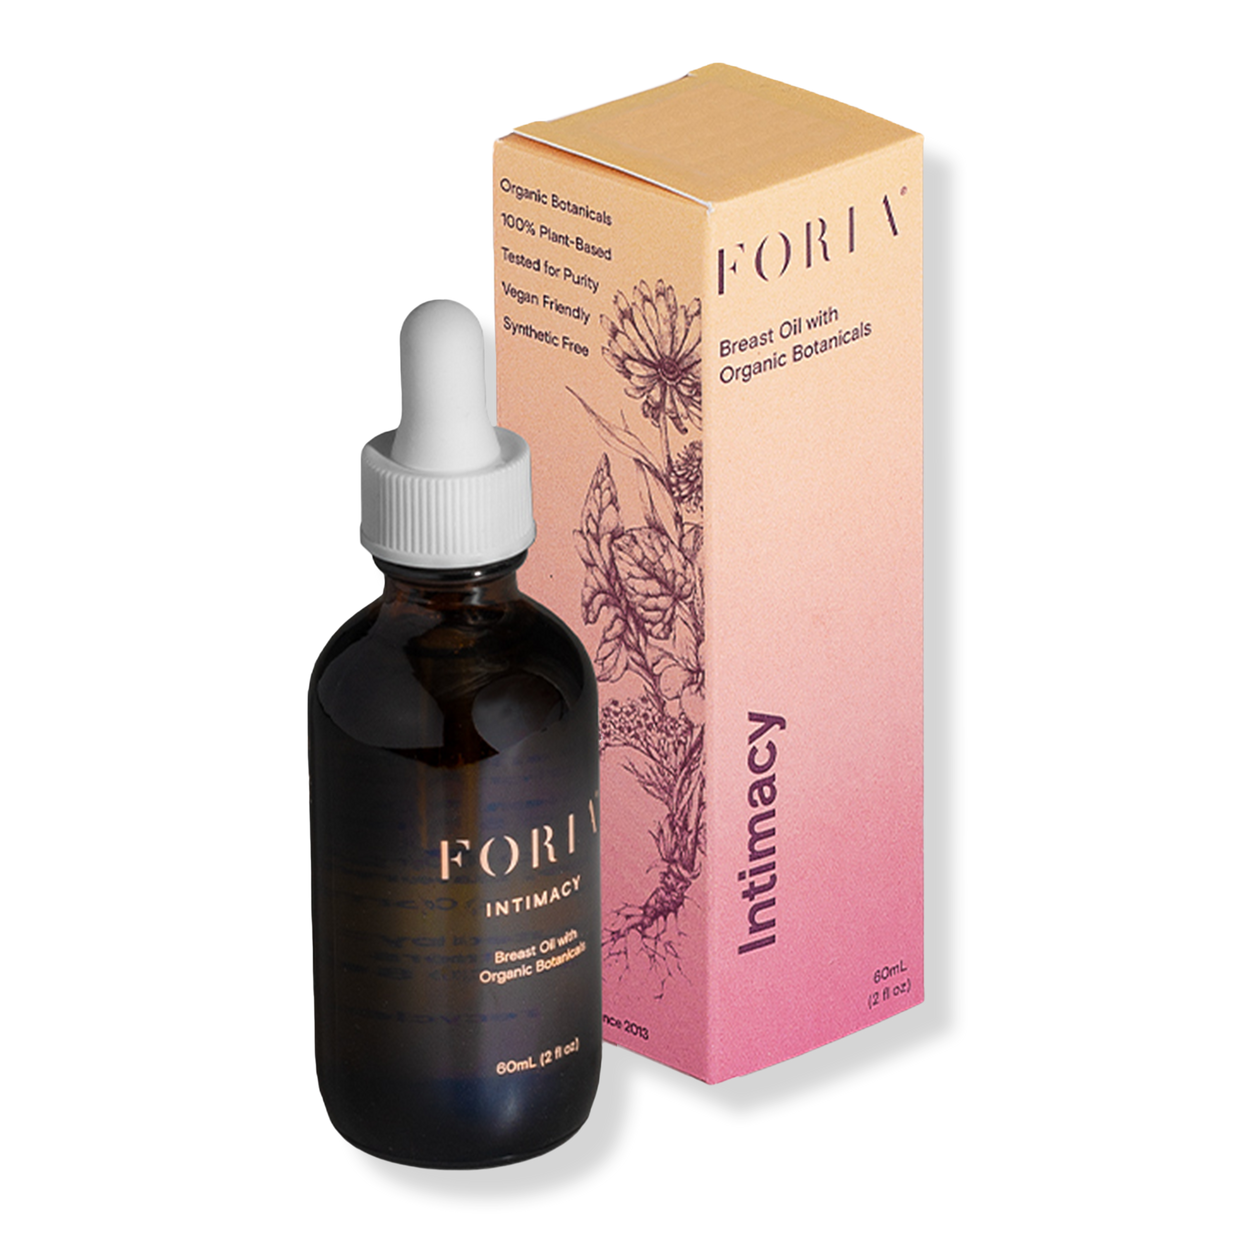 Breast Oil with Organic Botanicals - Foria